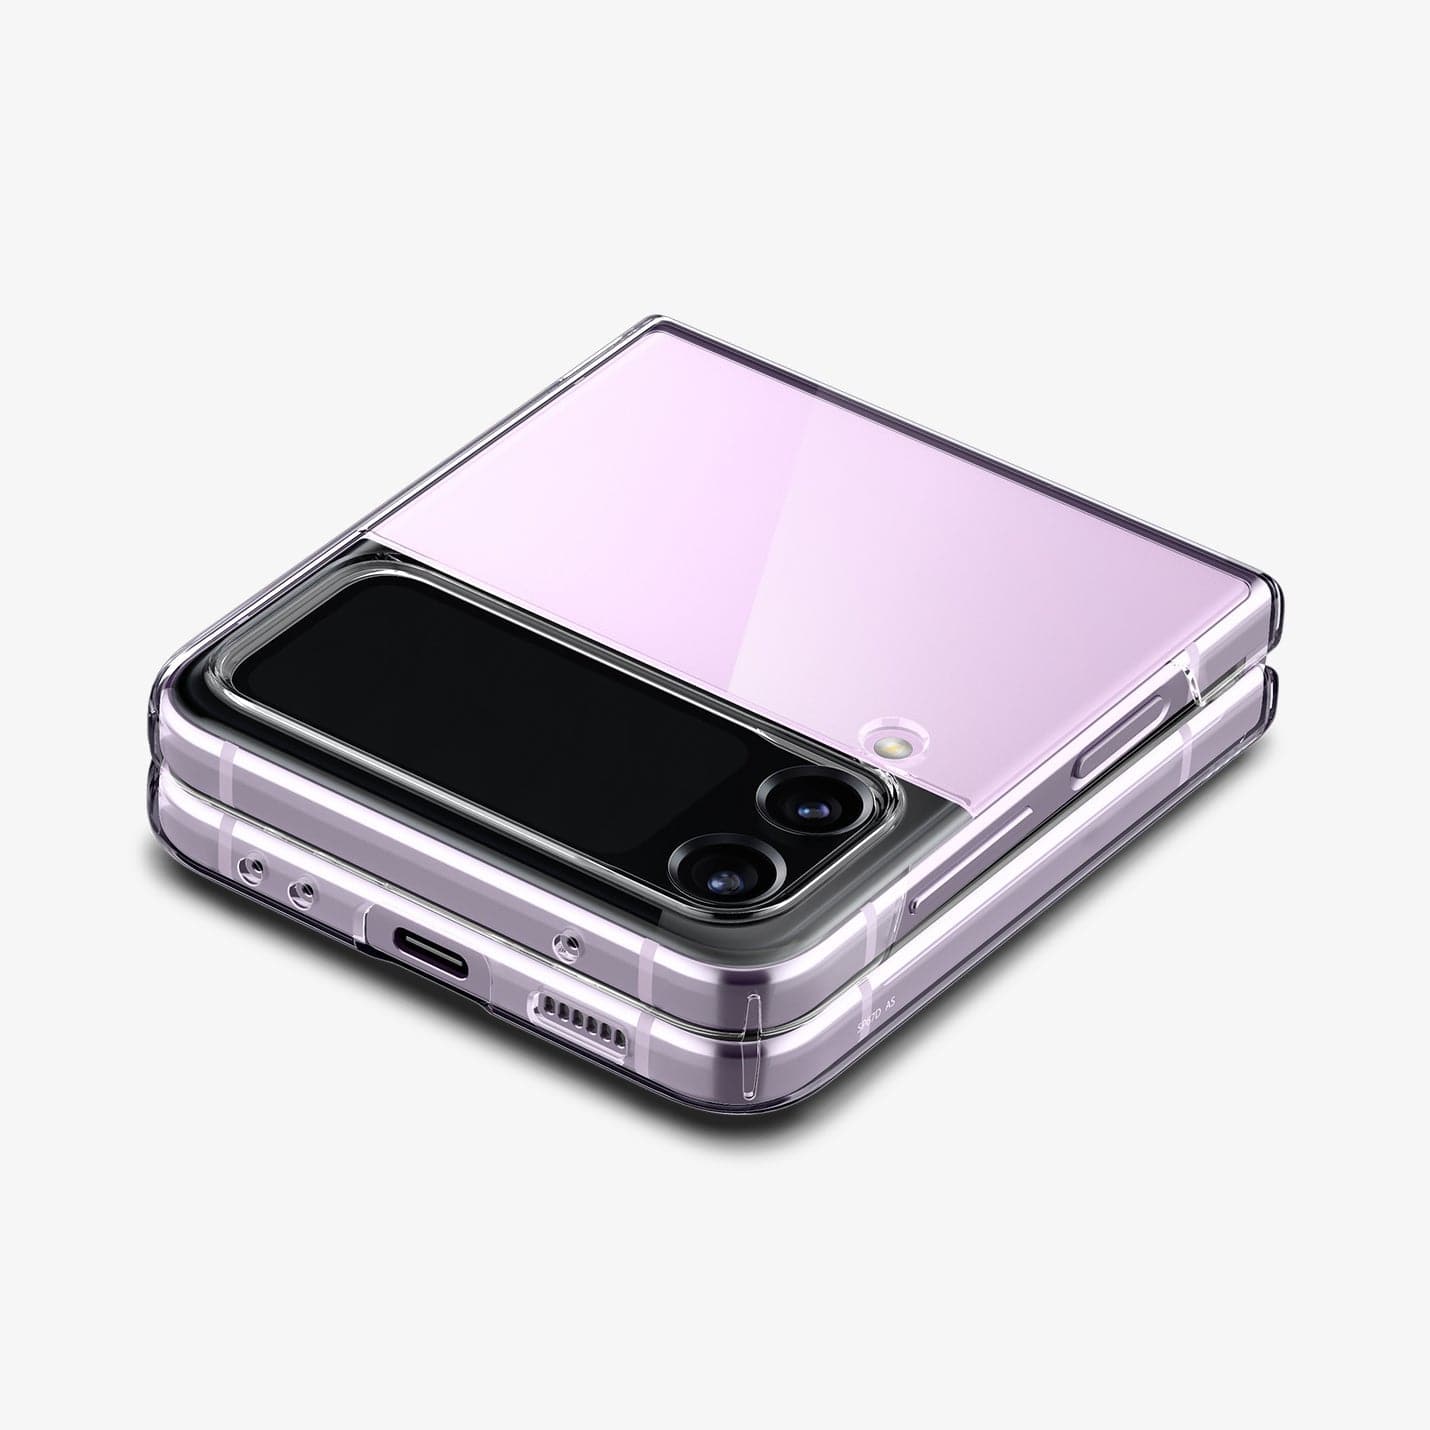 ACS05112 - Galaxy Z Flip 4 Case AirSkin in crystal clear showing the back and side with camera lens with device folded